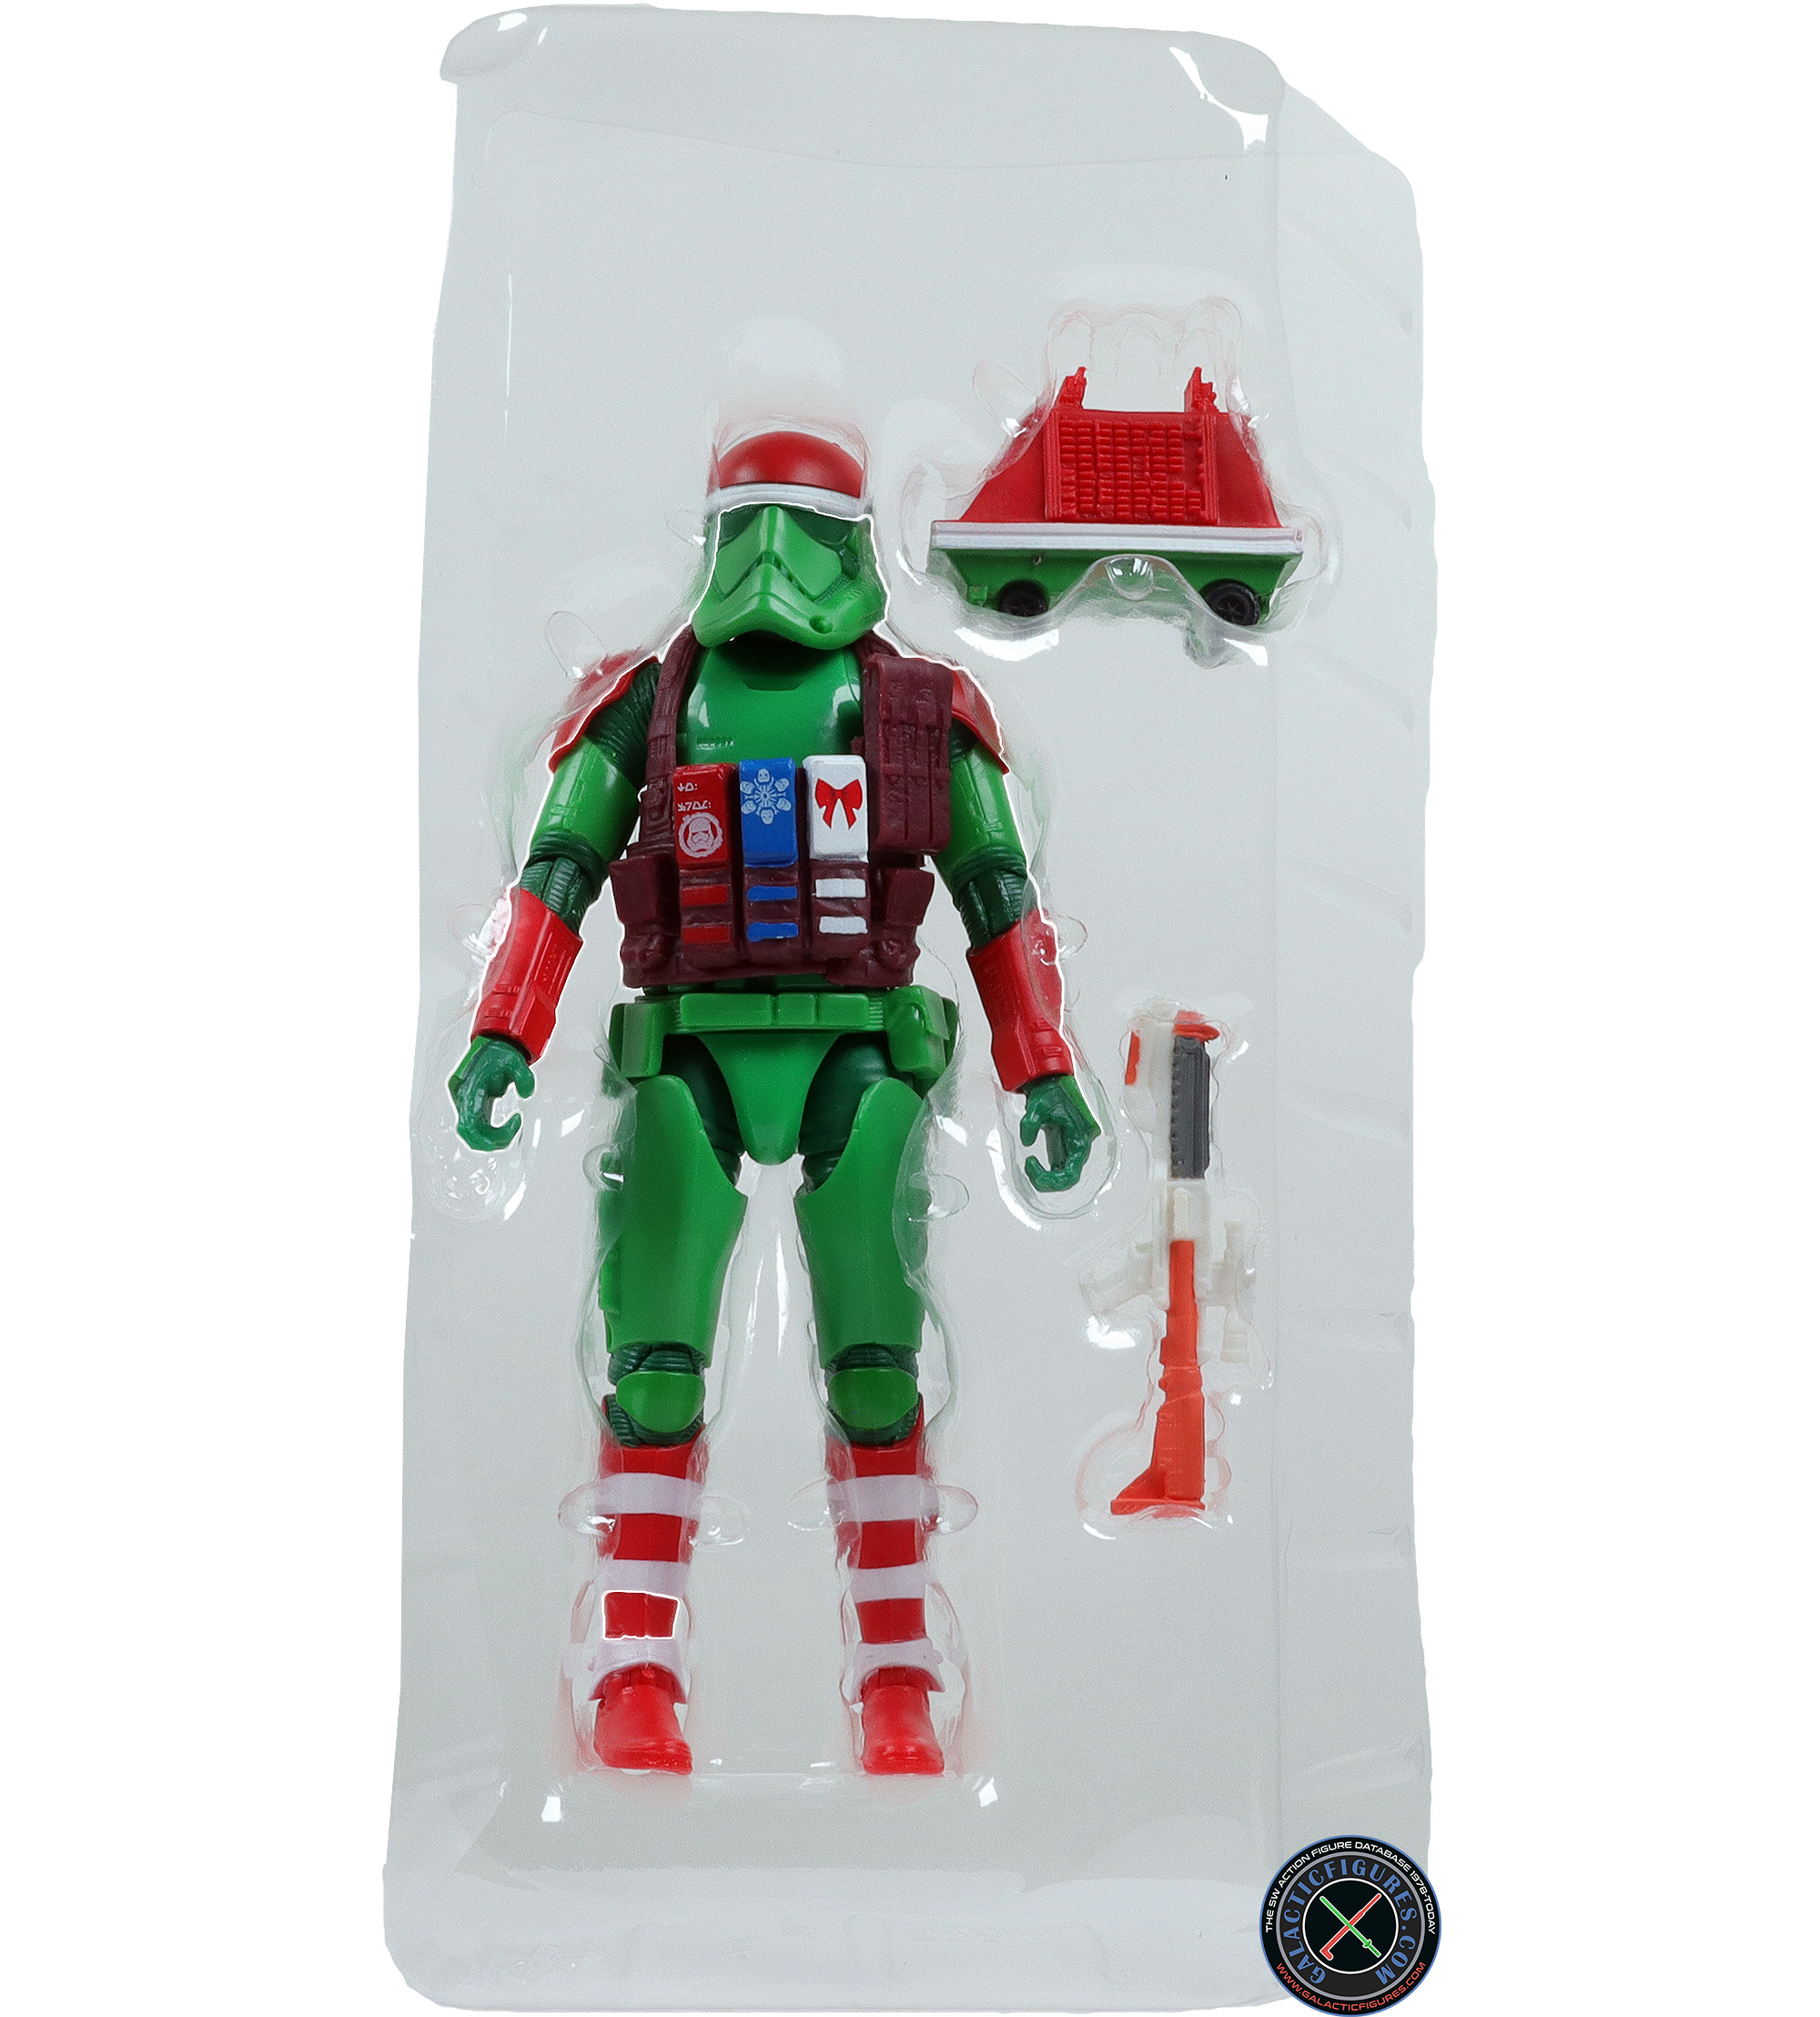 MSE Droid 2022 Holiday Edition 2-Pack #6 of 6